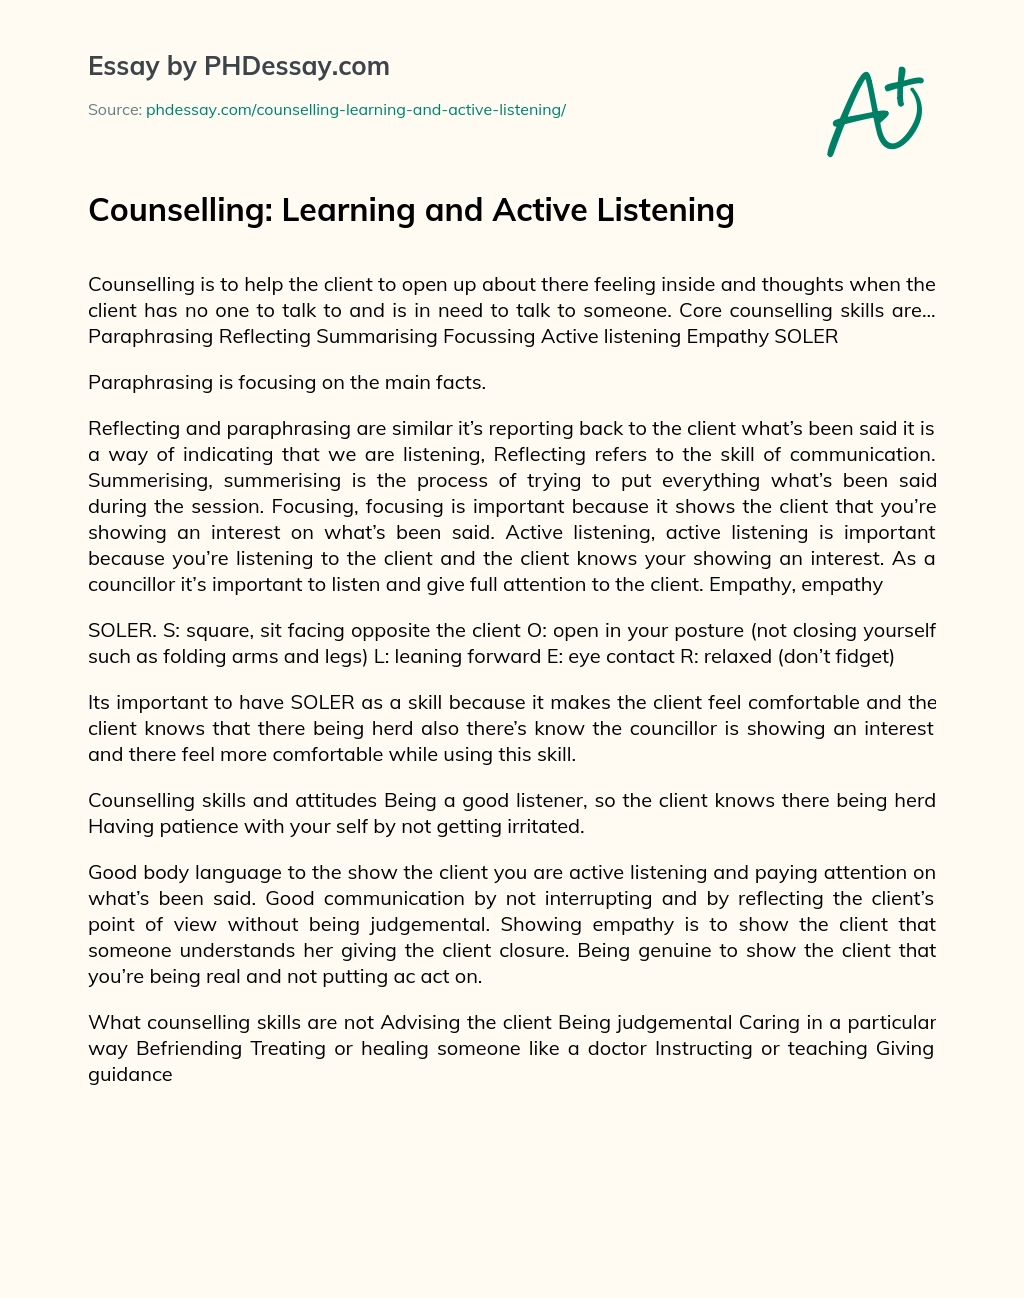 Counselling: Learning and Active Listening essay